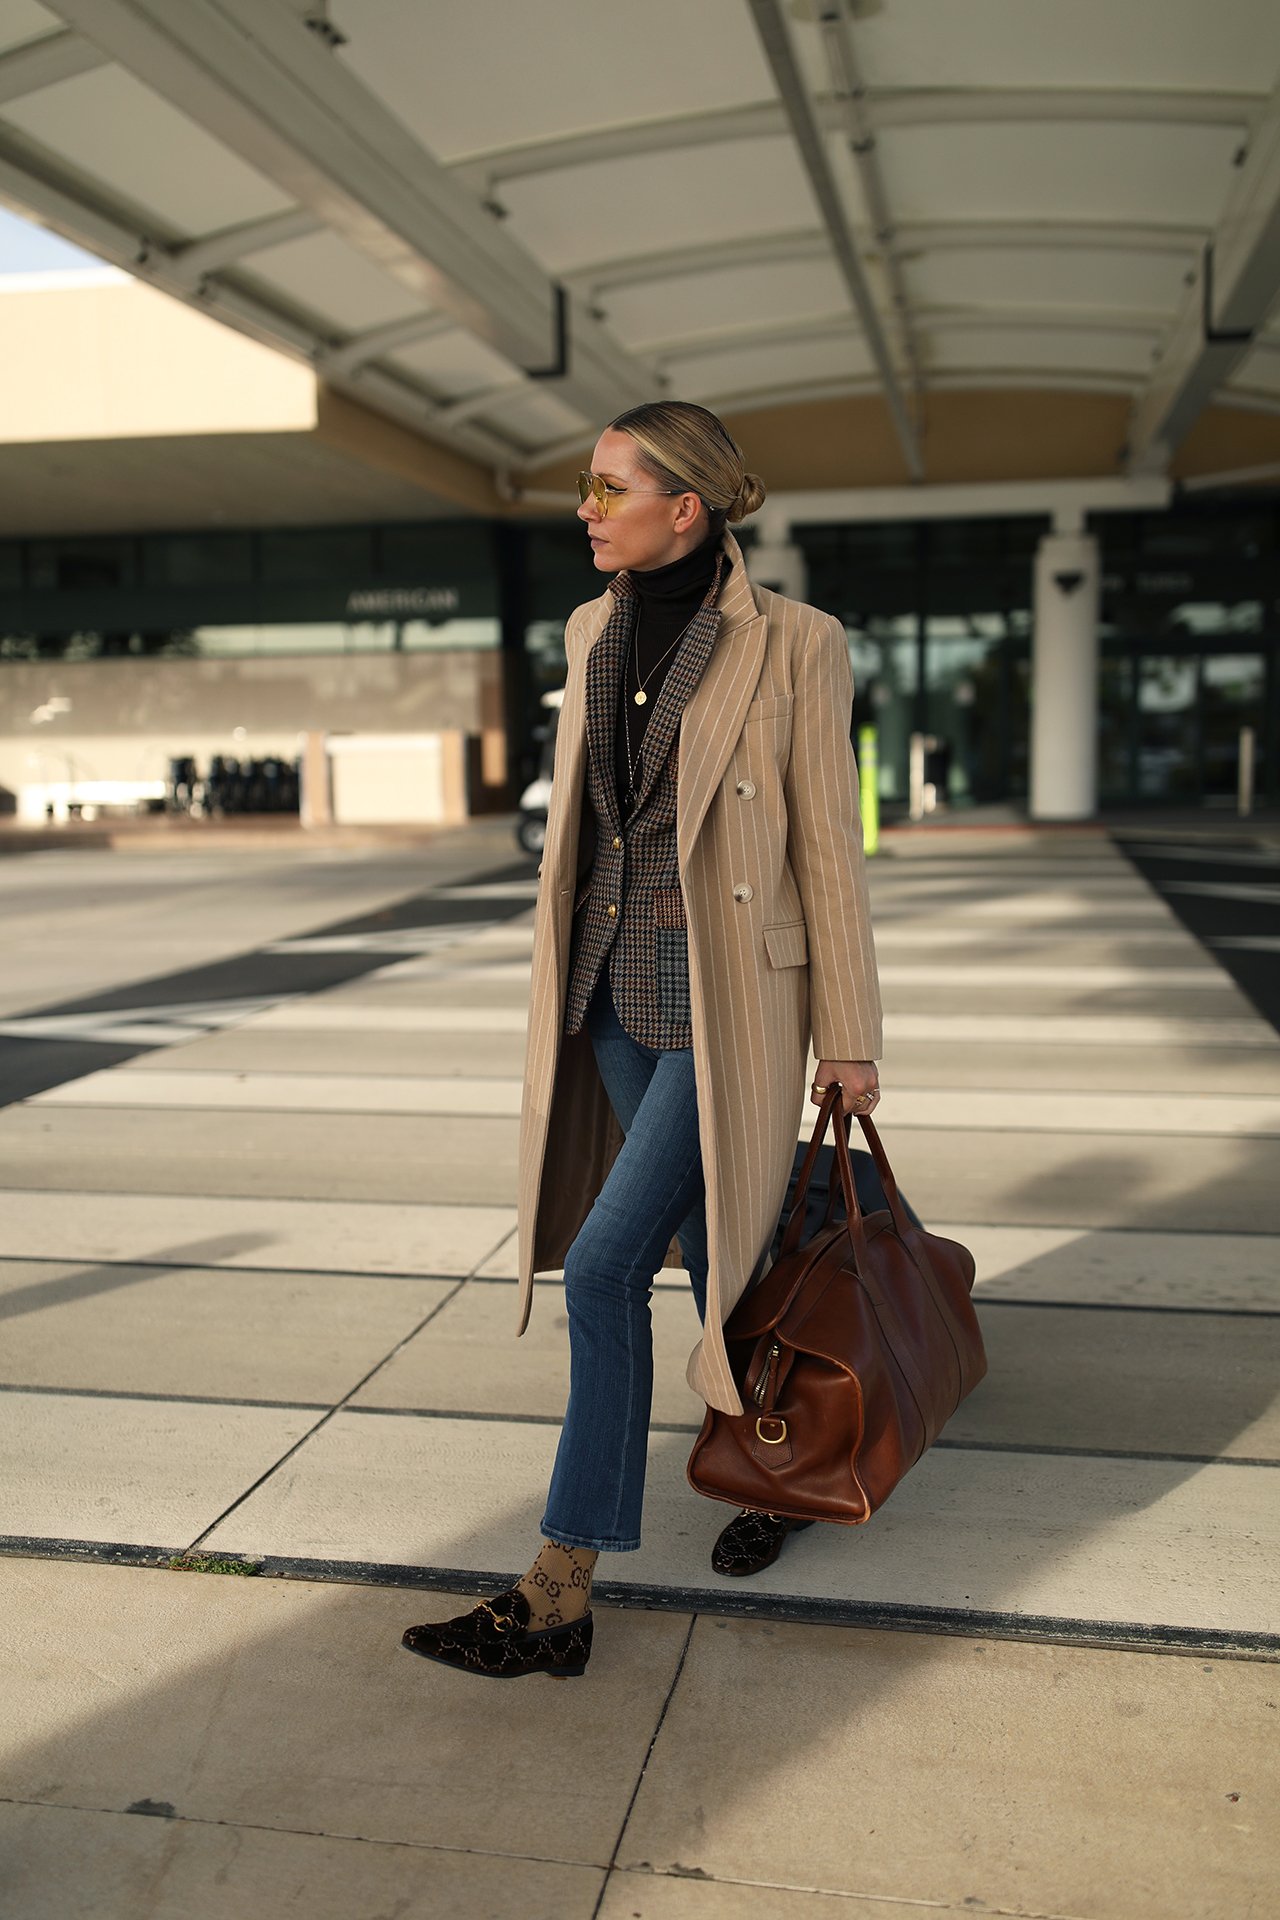 AIRPORT OUTFIT IDEAS: A STEP-BY-STEP GUIDE TO GET TRAVEL READY